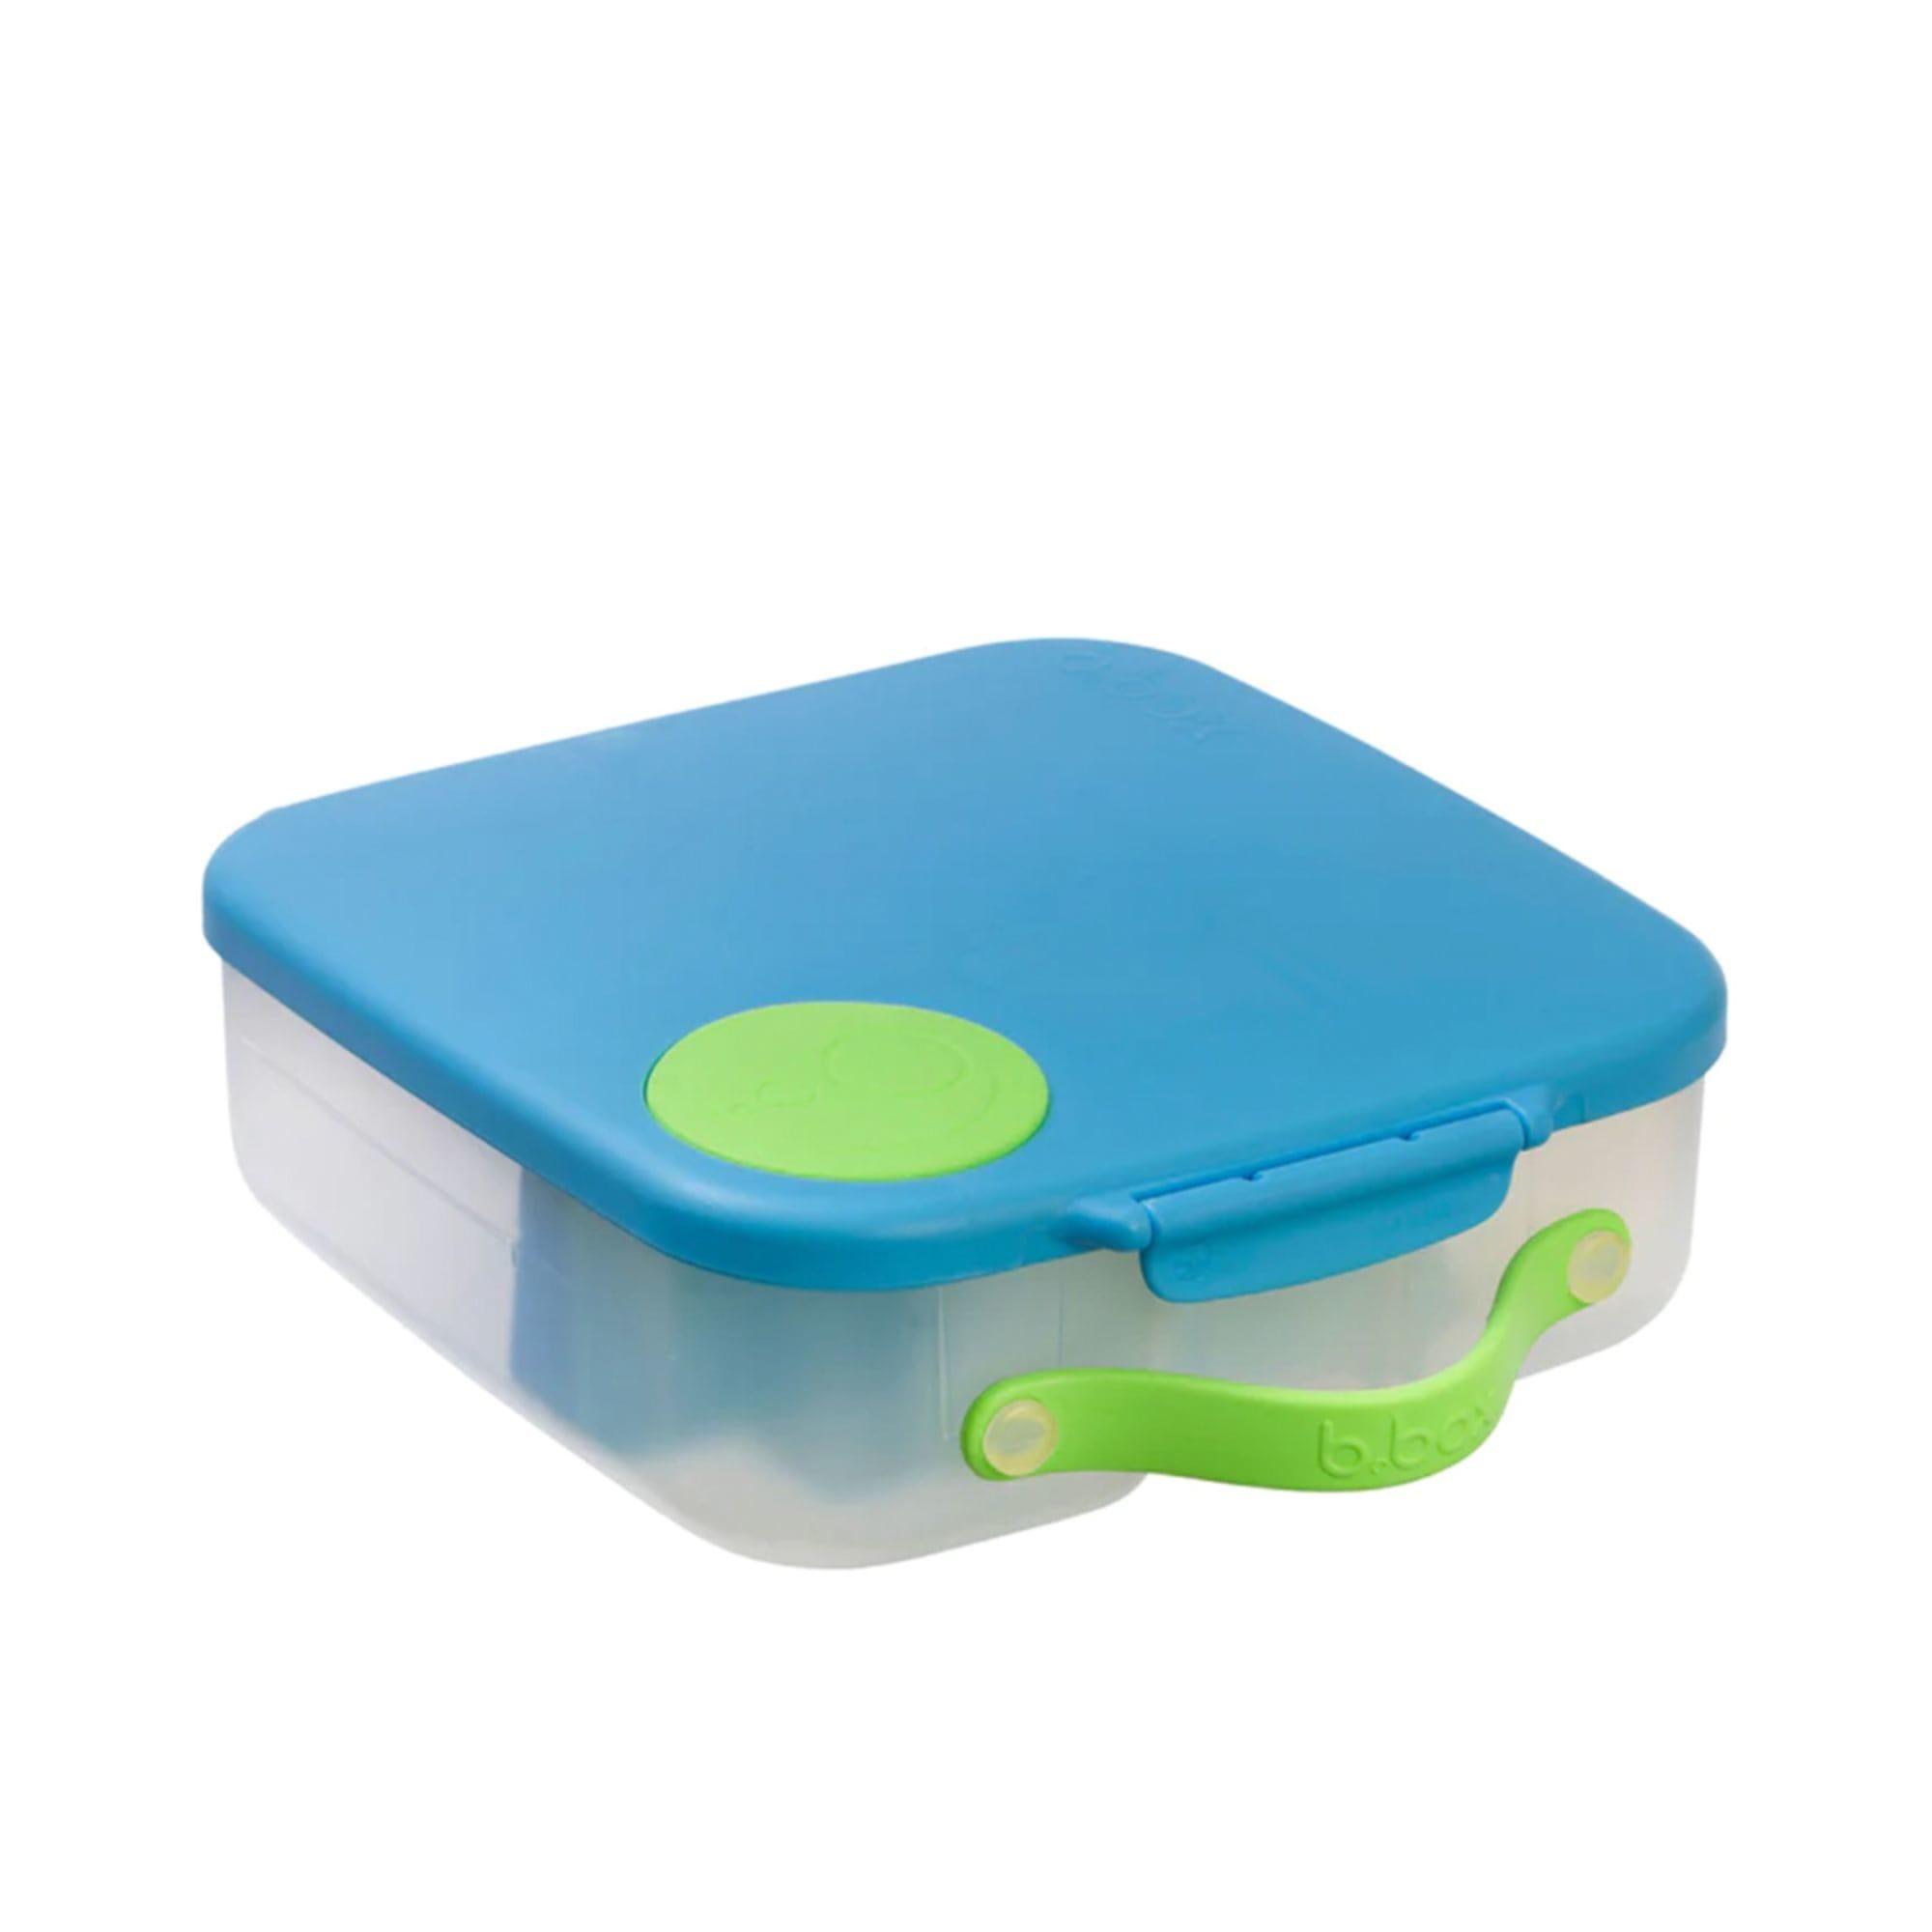 b.box Lunch Box with Gel Cooler 2L Ocean Breeze Image 9